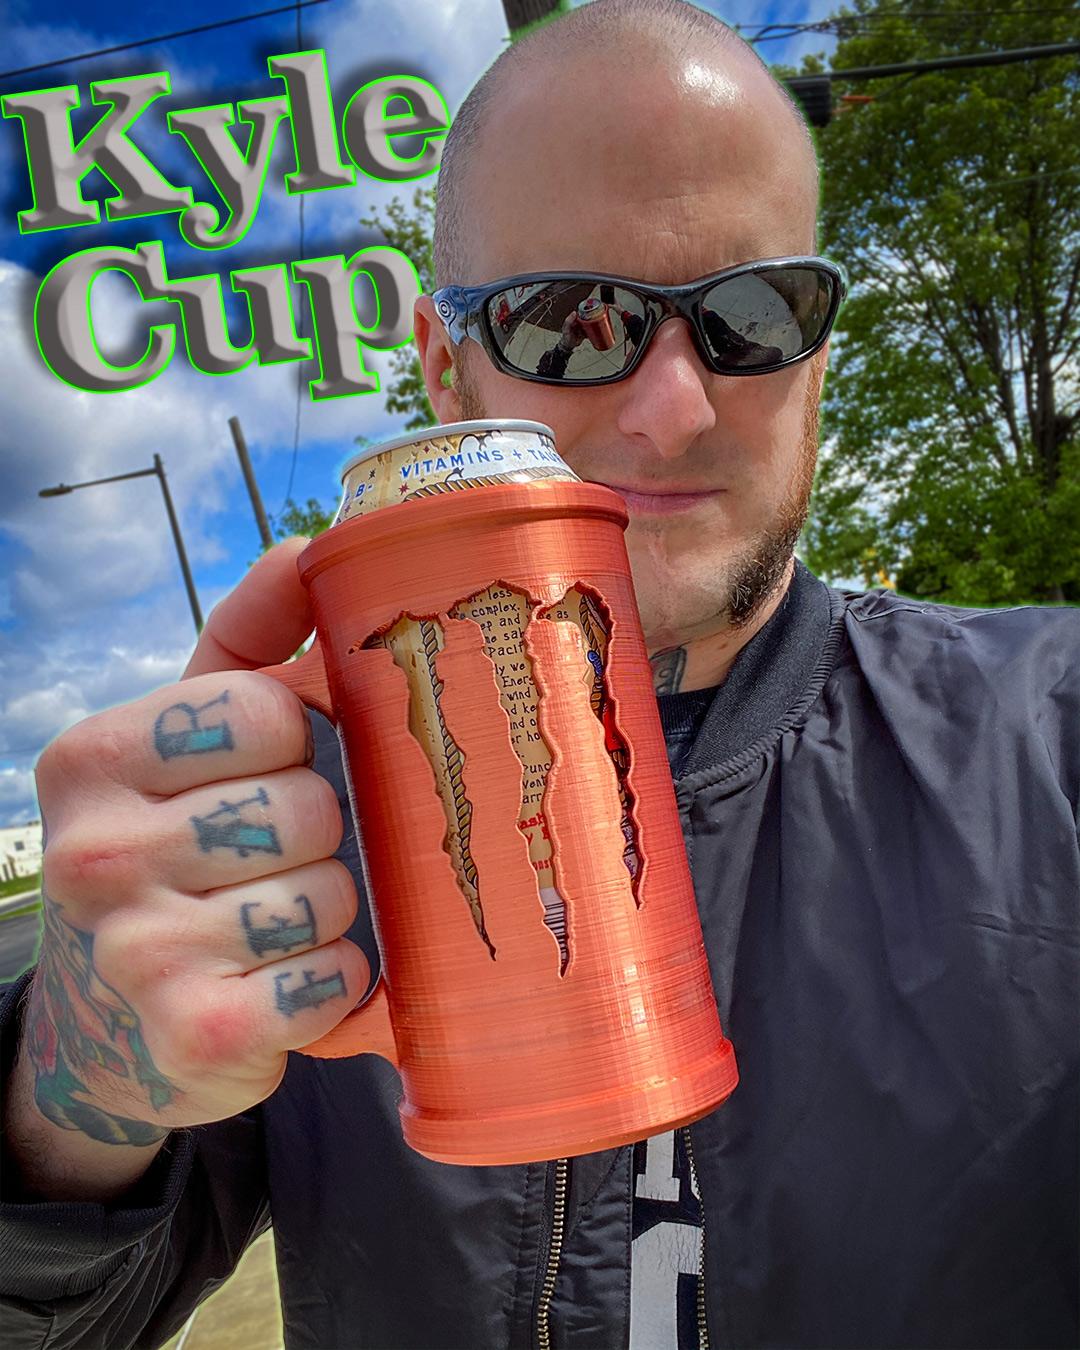 THE Kyle Cup - Munster Energy Can Stein aka the Chad Chalice Can Coozie! - THE Kyle Cup, Monster Energy Drink Stein aka the Chad Chalice or the Stimulant Stein! - 3d model